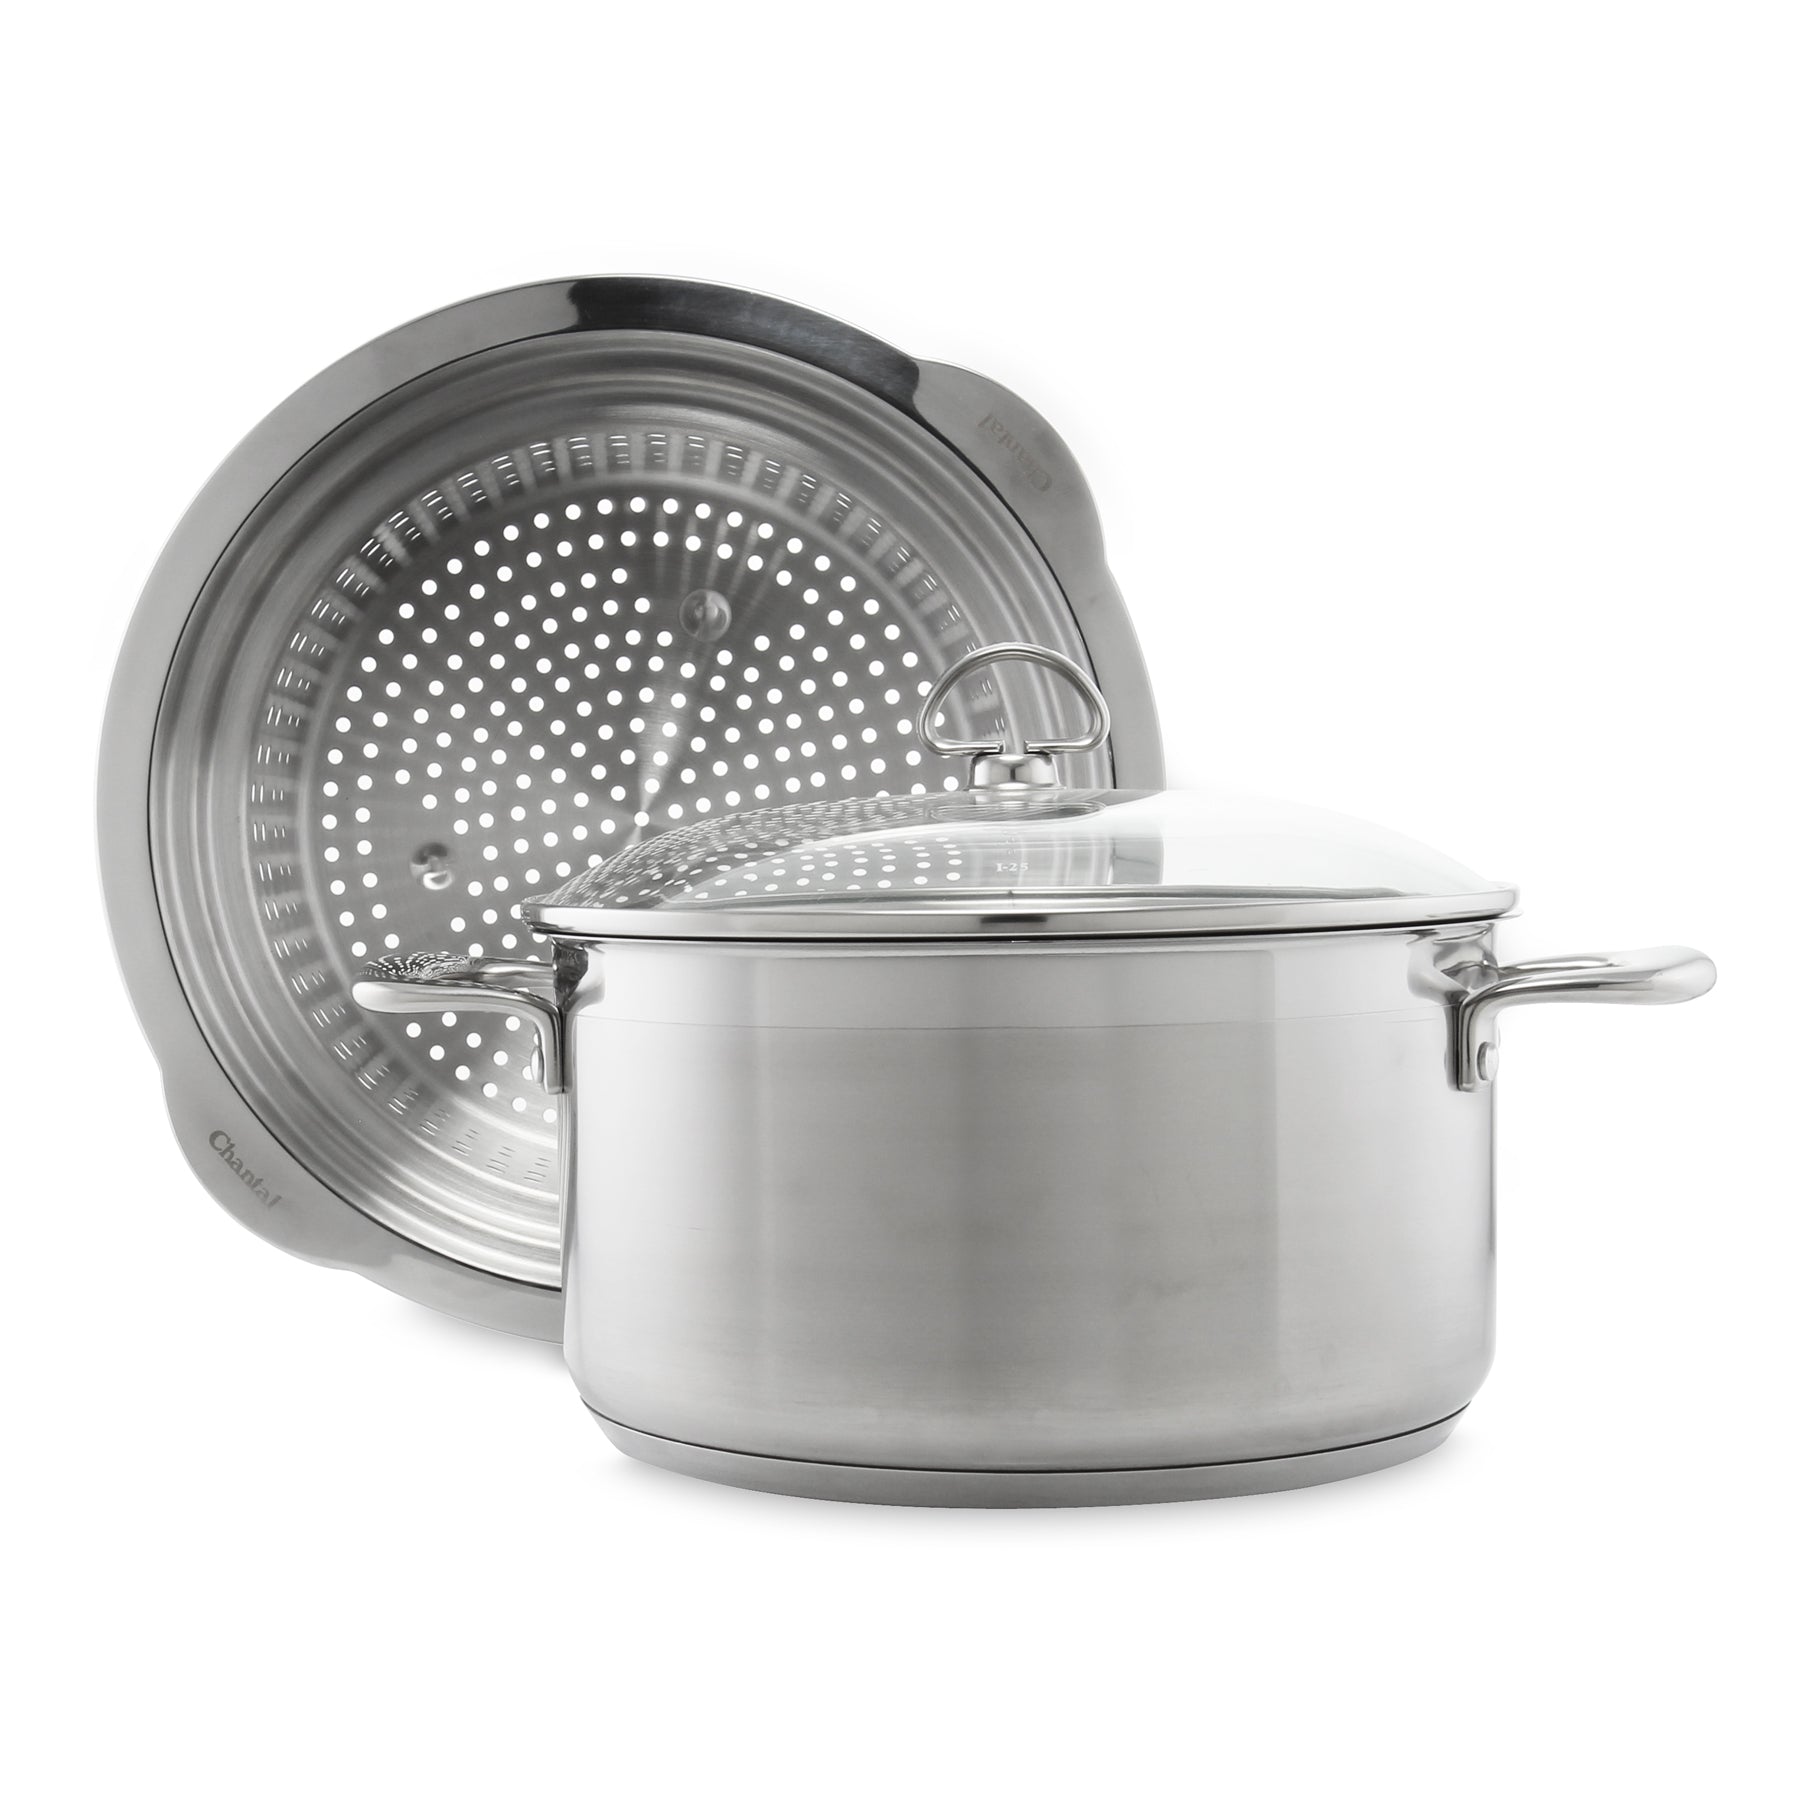 induction 21 stainless steel 6 quart stockpot with steamer insert set